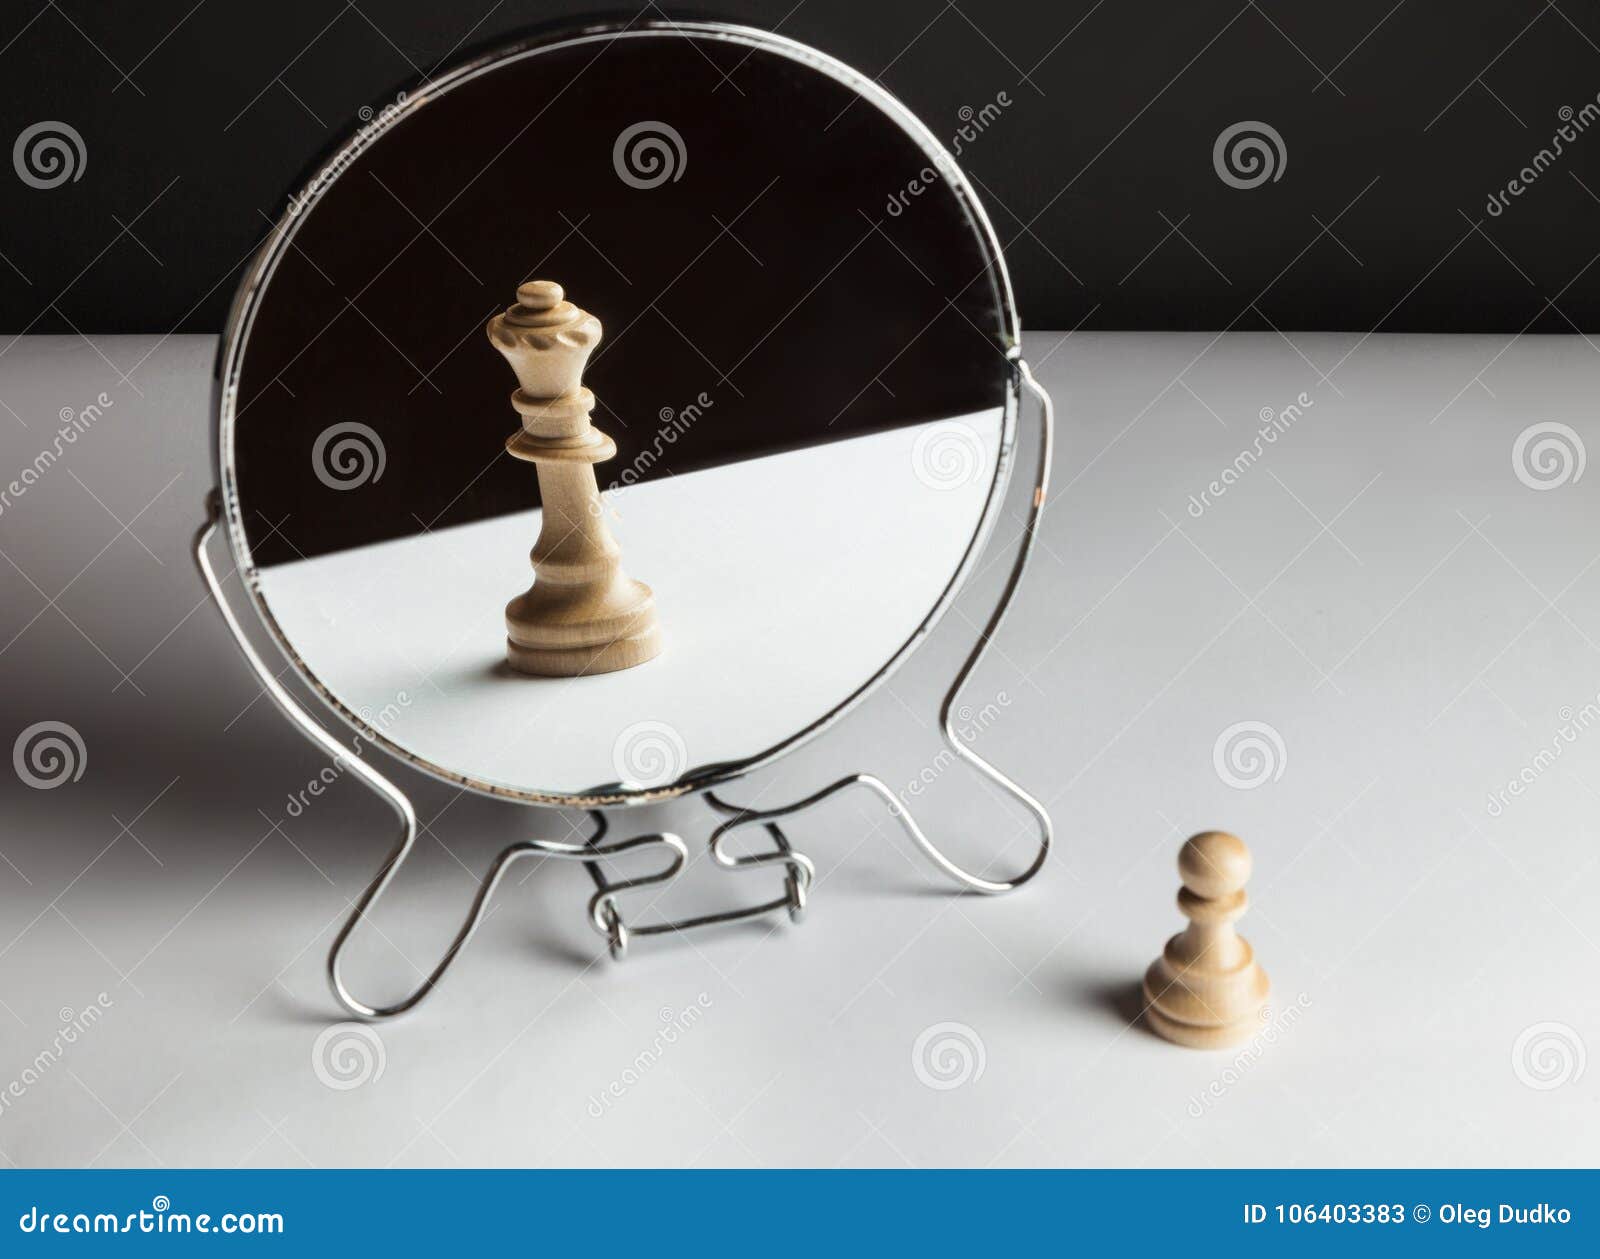 chess pawn looking in the mirror and seeing a